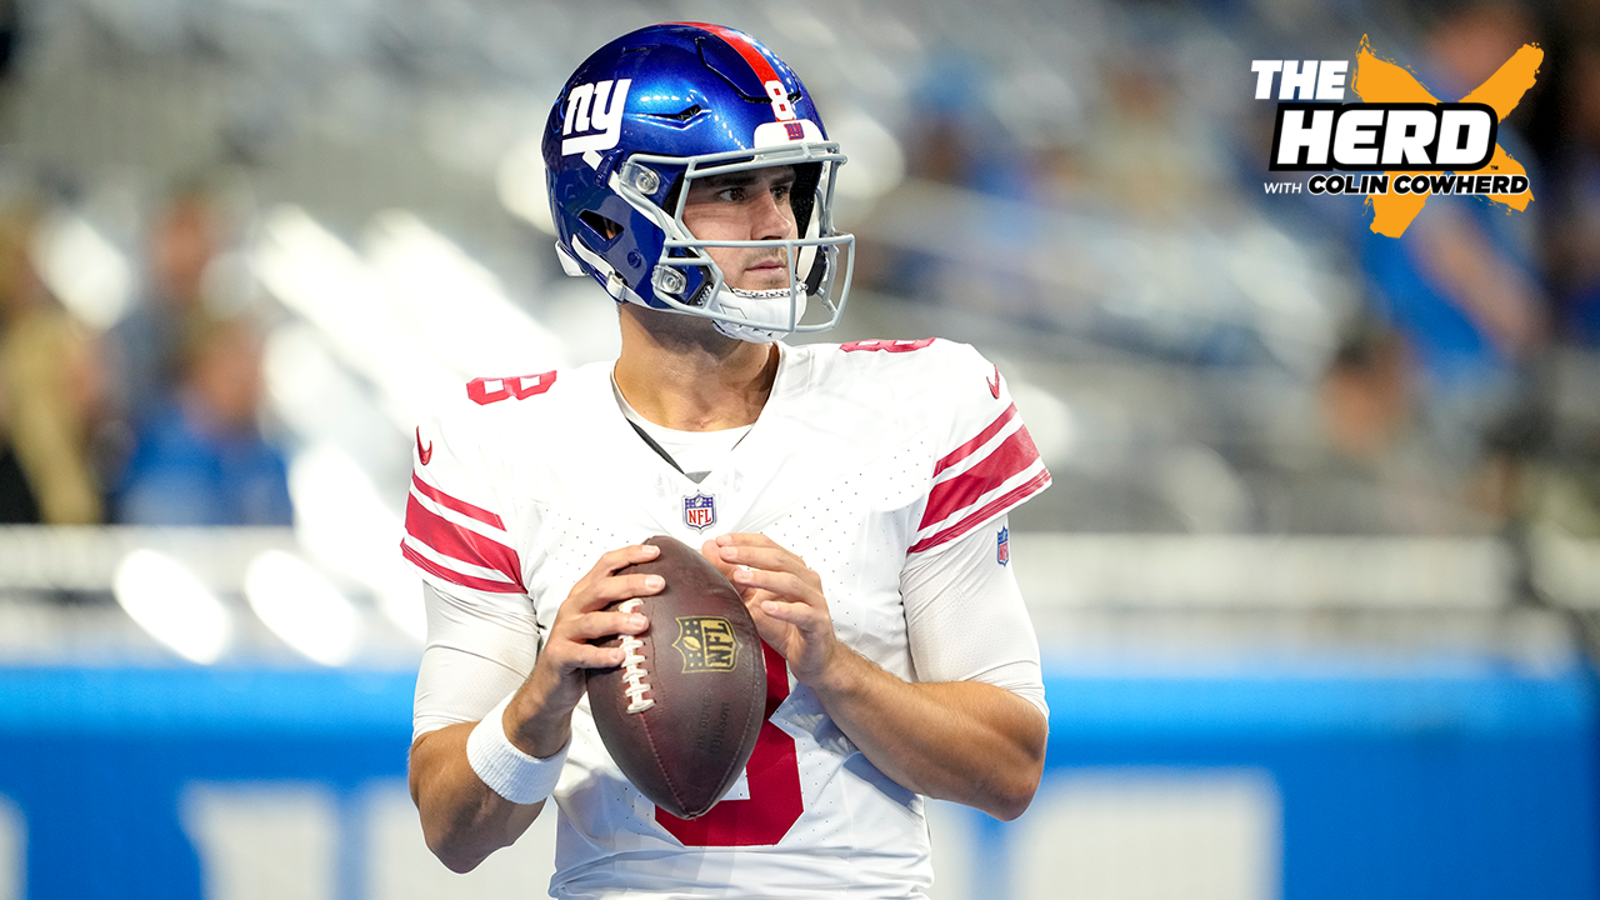 What are Giants expectations for Daniel Jones?